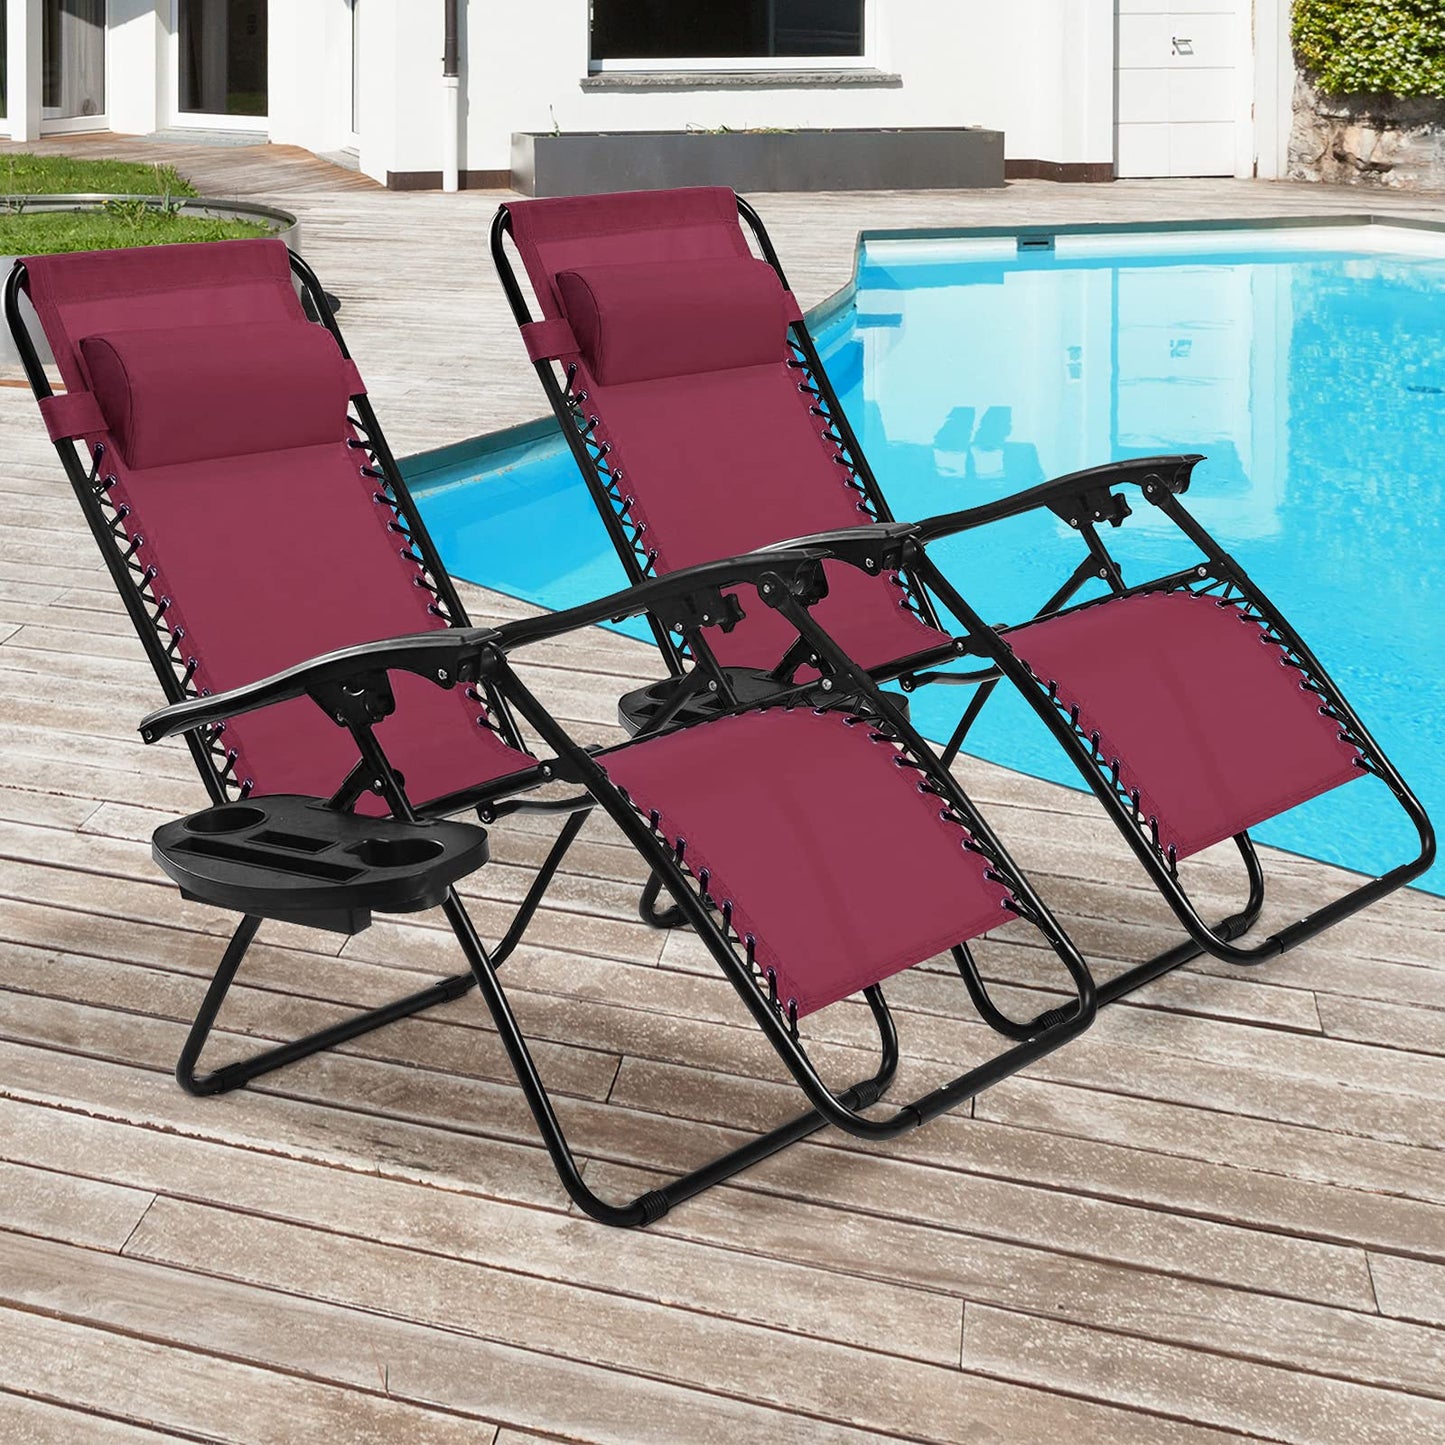 Goplus Zero Gravity Chair, Adjustable Folding Reclining Lounge Chair with Pillow and Cup Holder, Patio Lawn Recliner for Outdoor Pool Camp Yard (Set of 2, Wine) set of 2